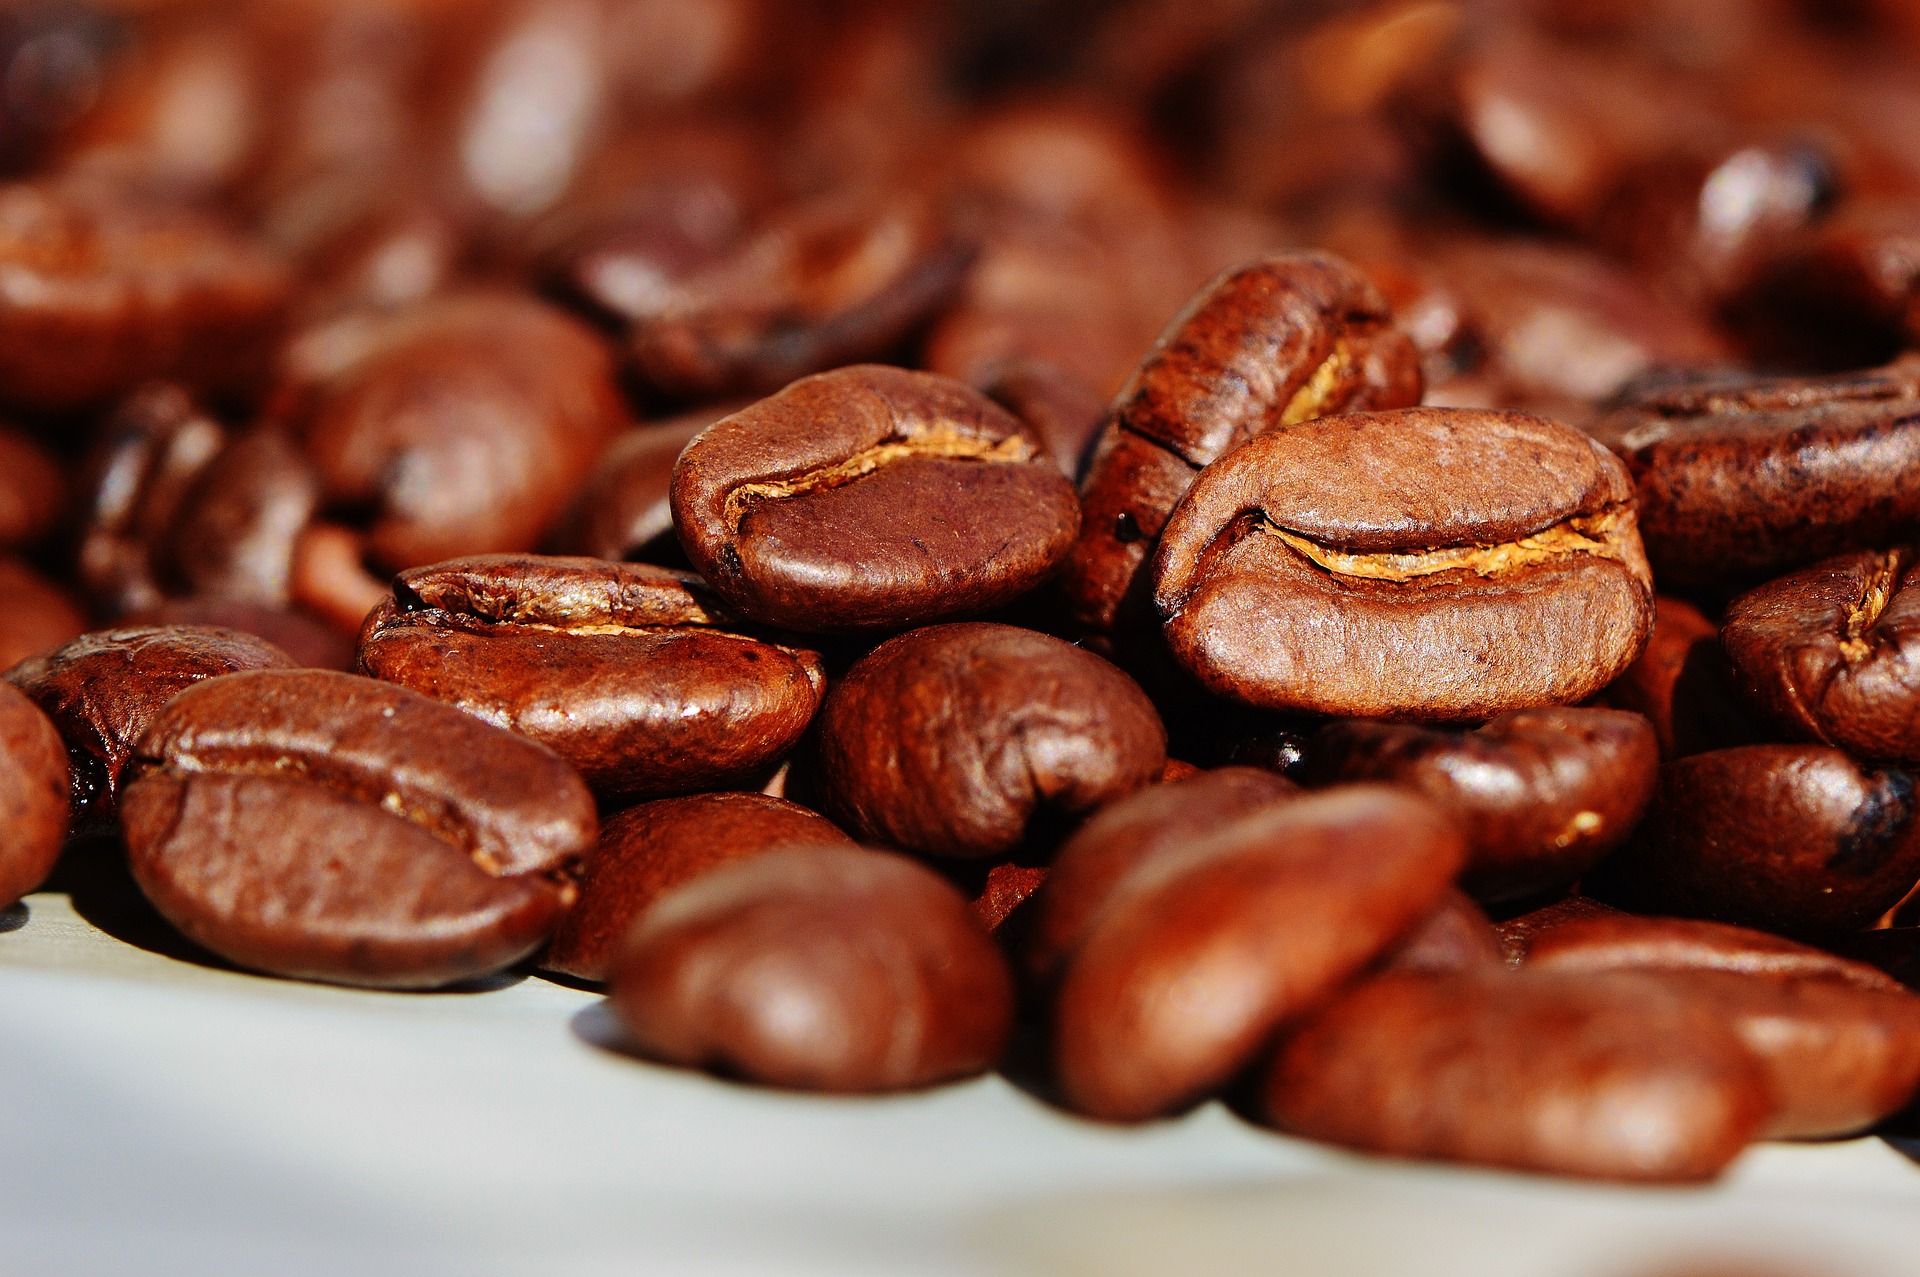 Coffee exports worldwide total 72,19 million bags in seven months